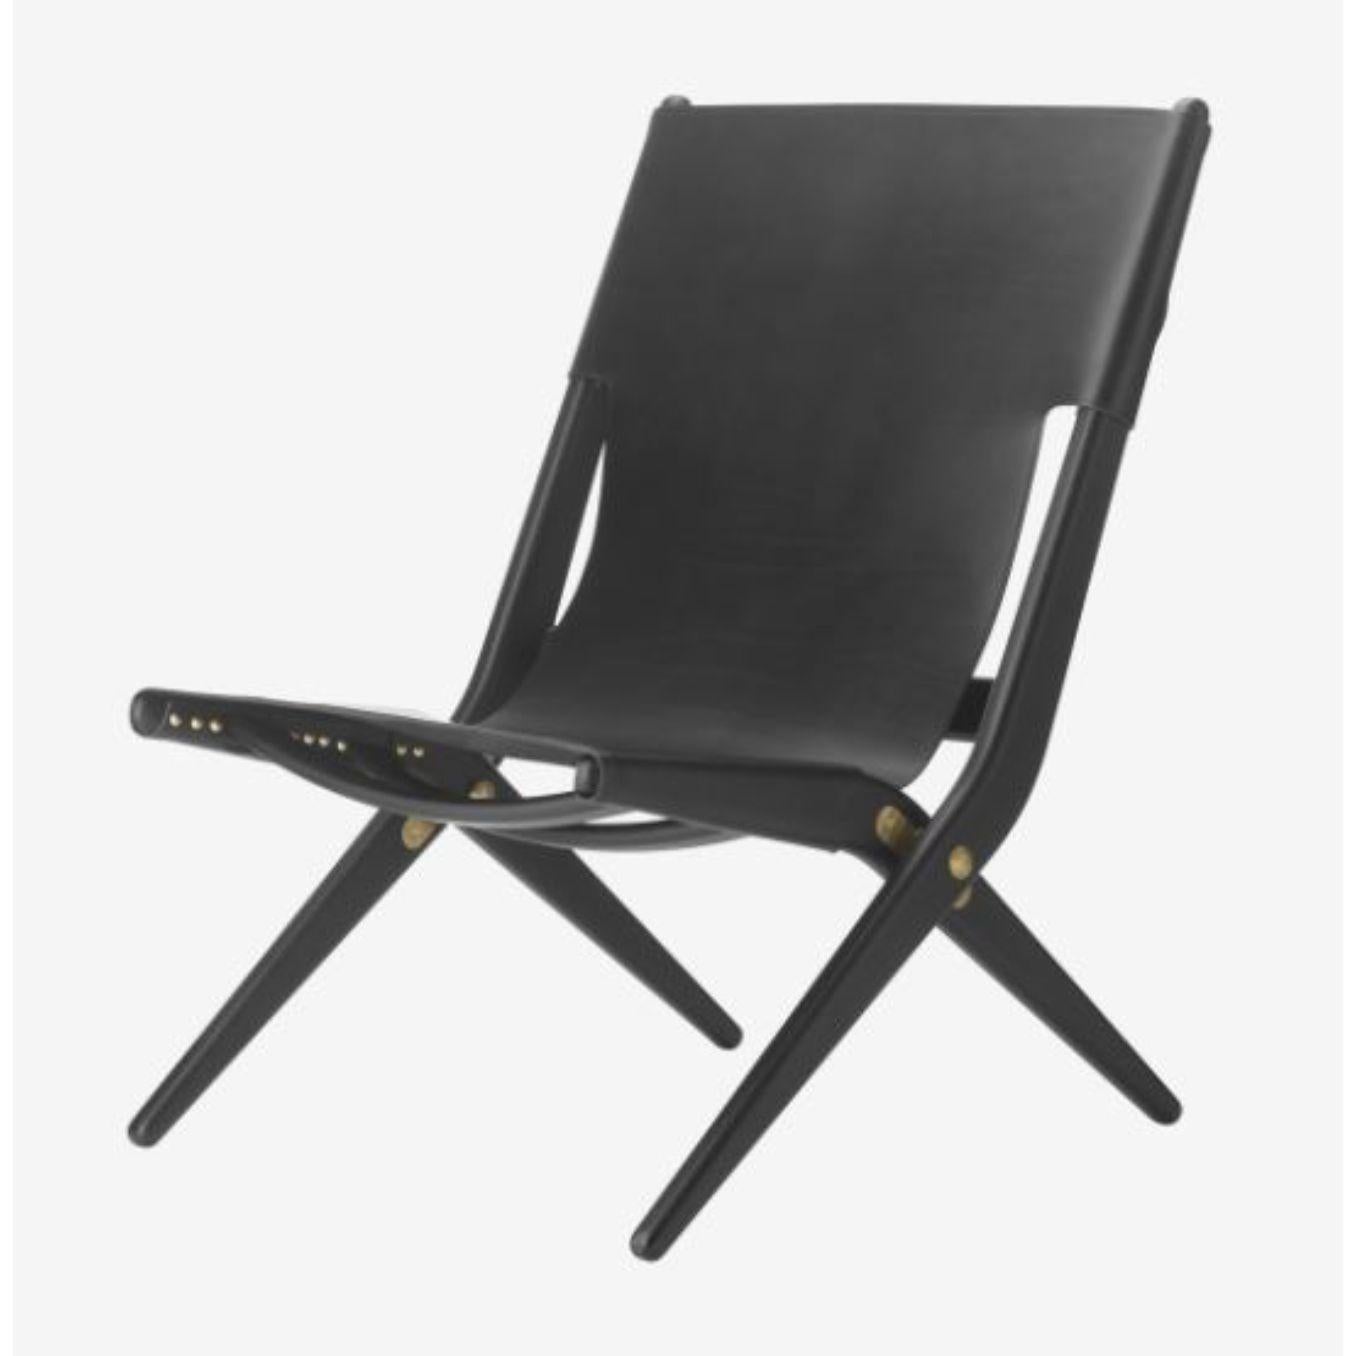 Black leather Saxe chair by Lassen.
Dimensions: D 67 x W 60 x H 84 cm. 
Materials: Leather, Wood, Black Stained Oak.
Also available in different colours and materials.
Weight: 13 Kg

Mogens Lassen was perceived as ‘the naughty boy in class’,